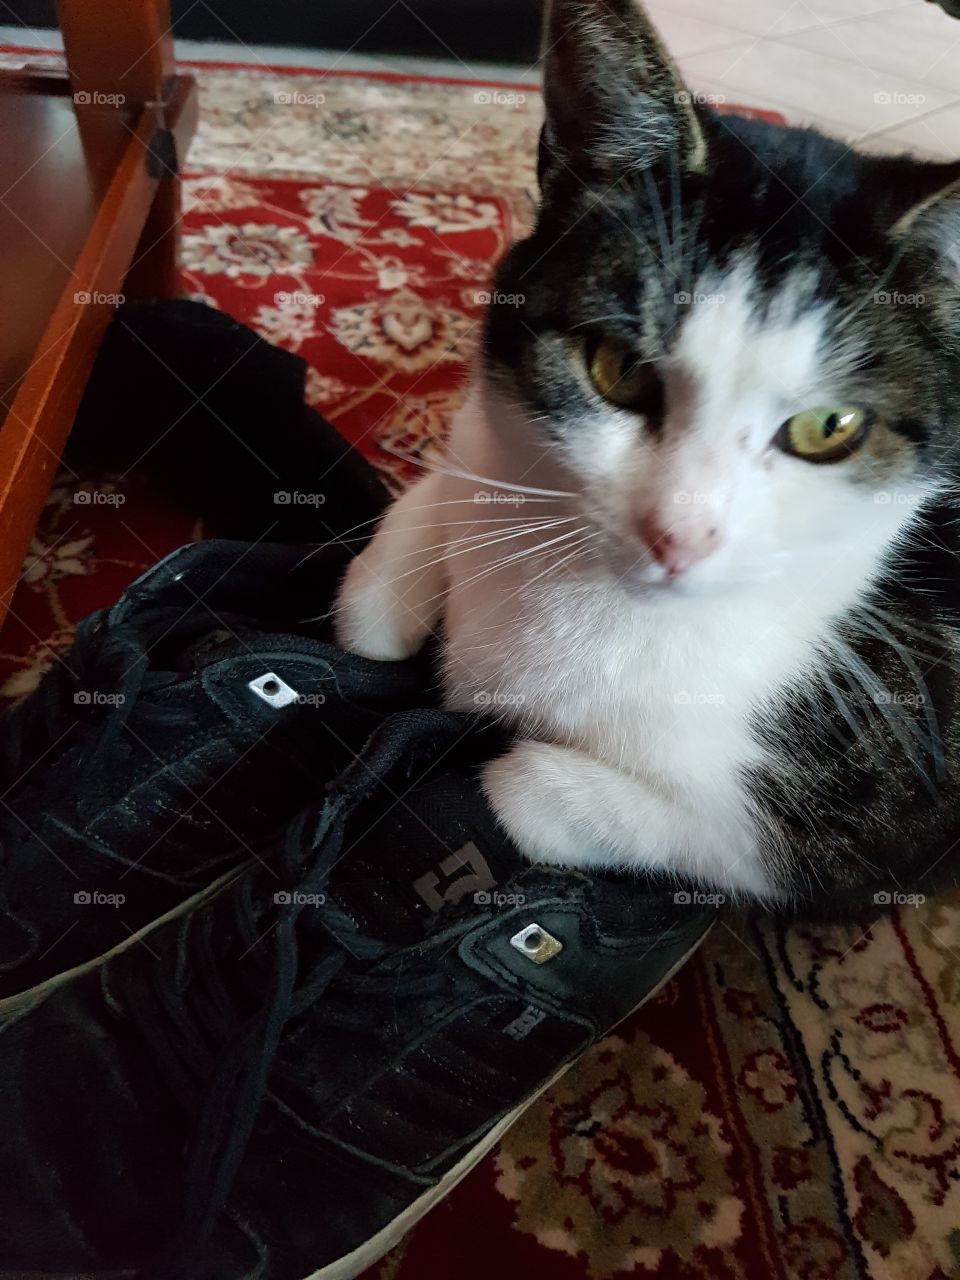 cat in shoes, shoe lover